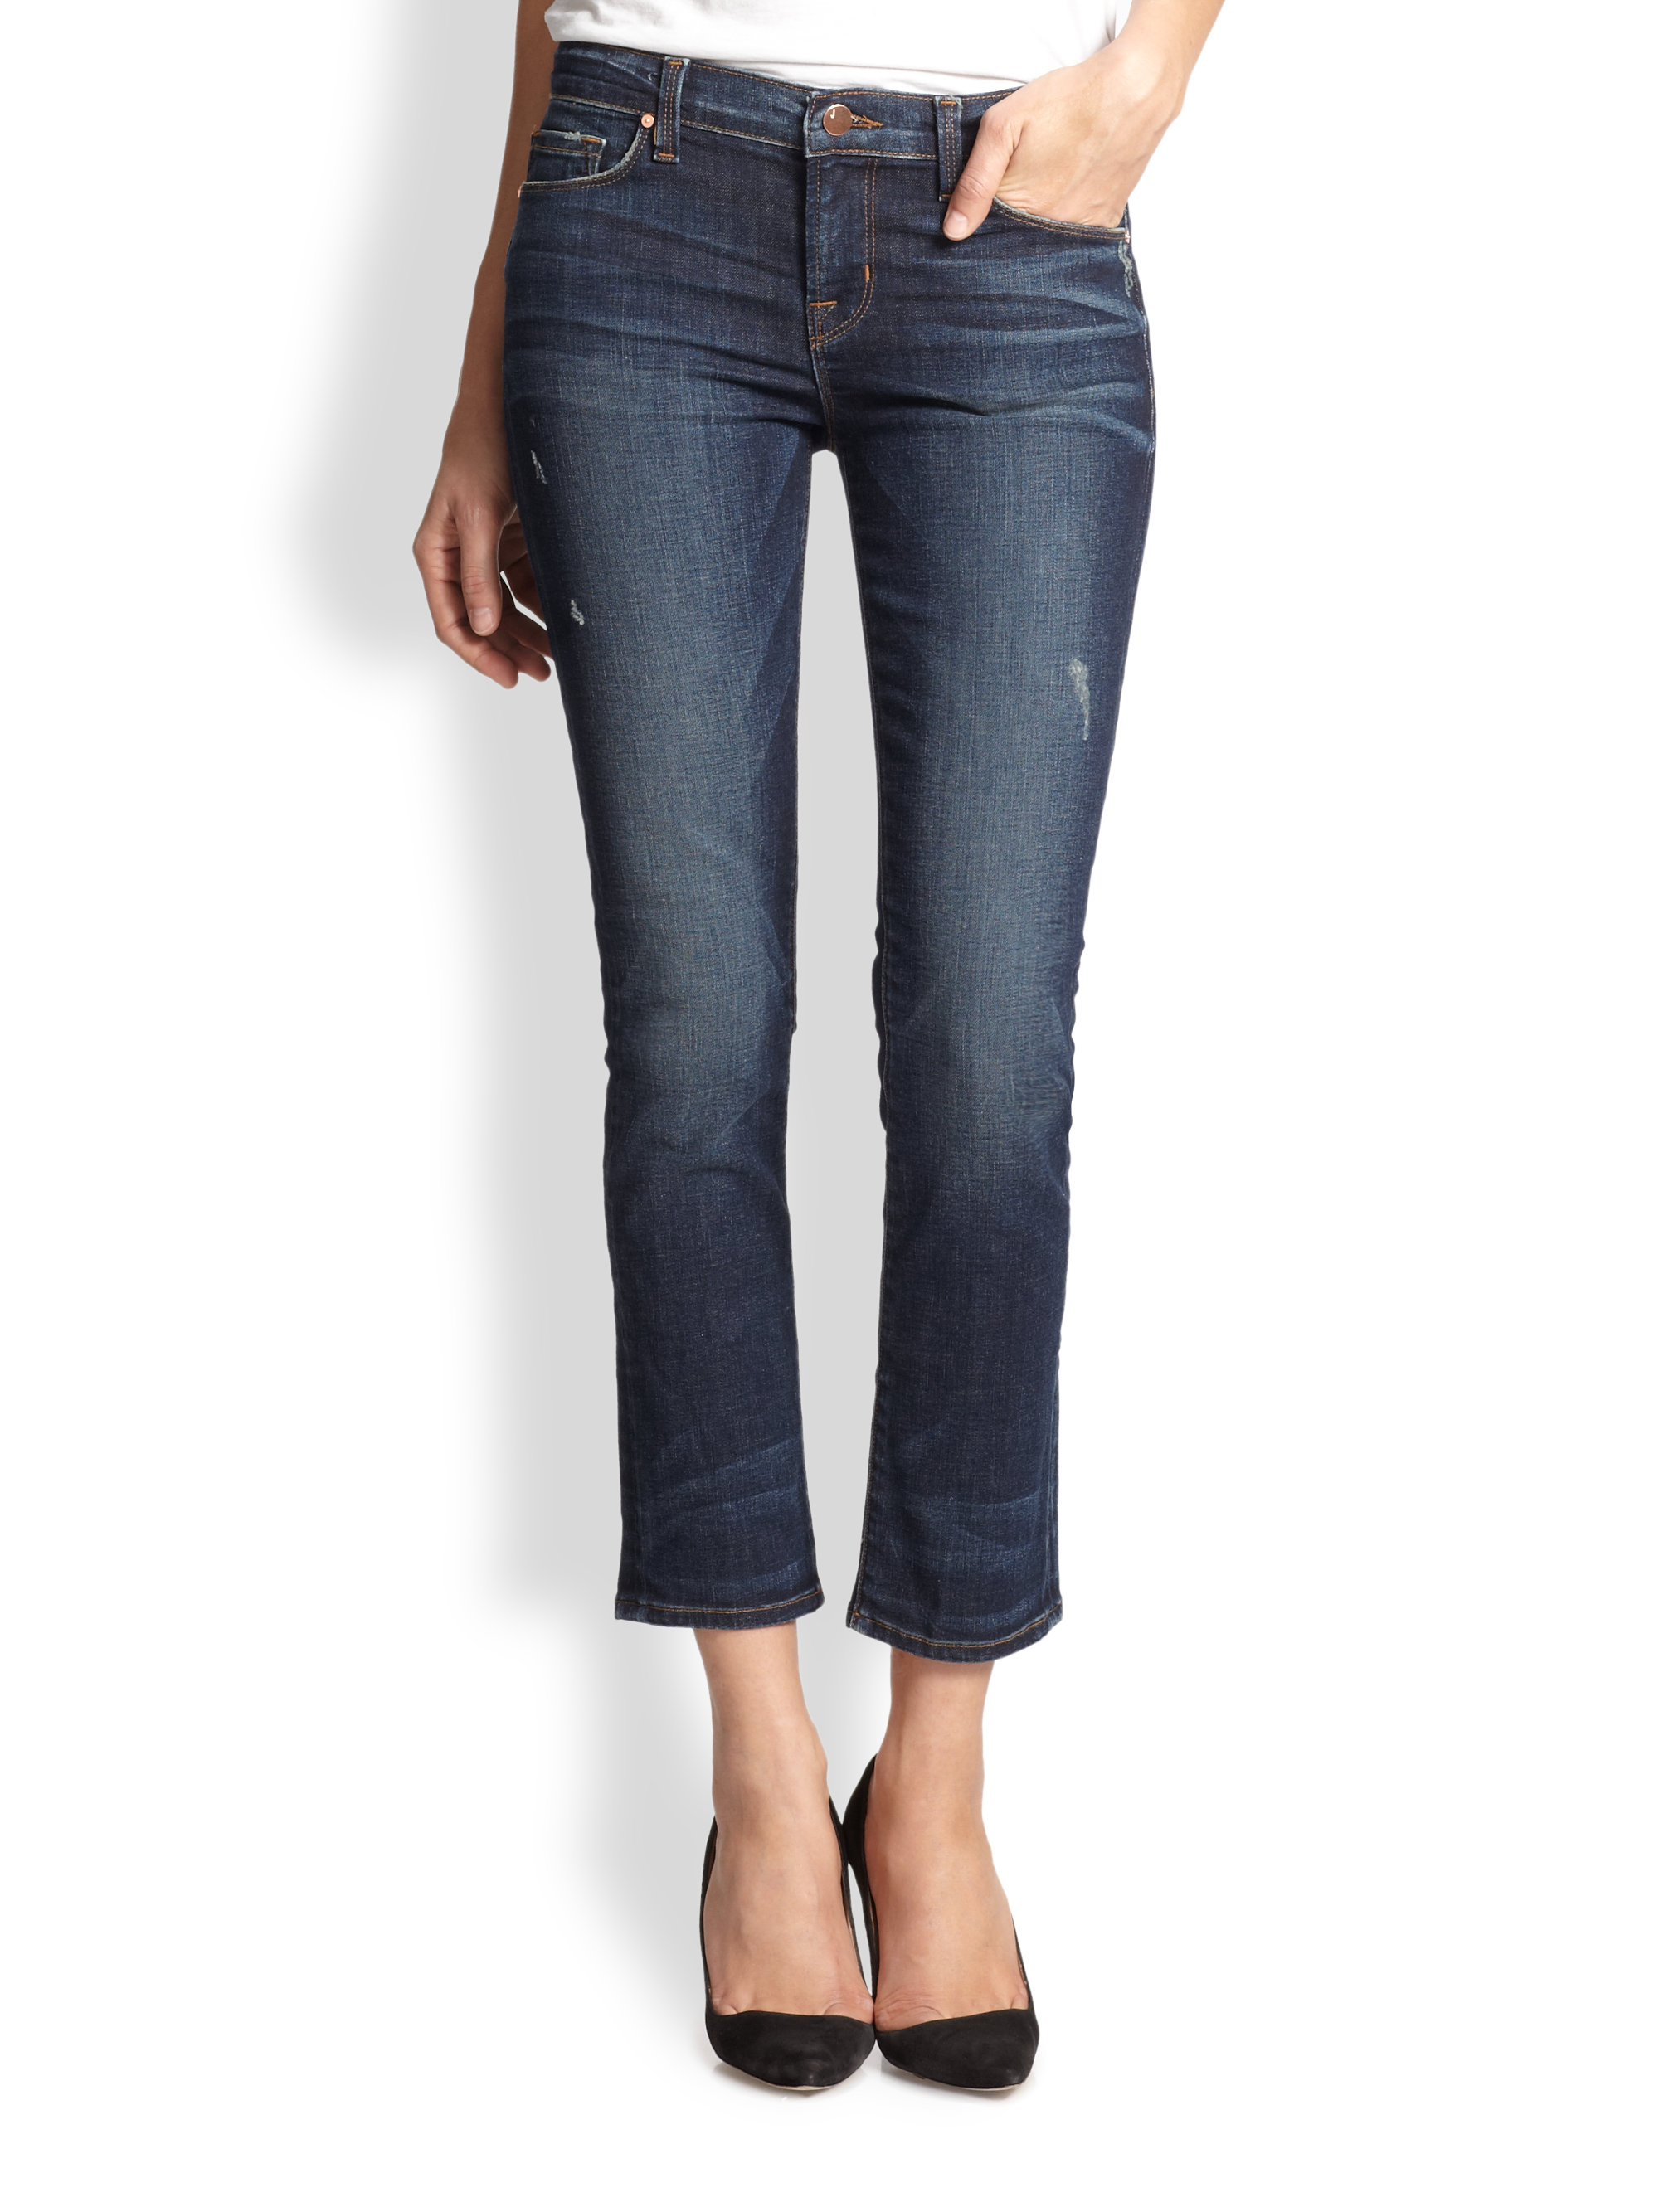 Lyst - J Brand Low-rise Distressed Cropped Jeans in Blue